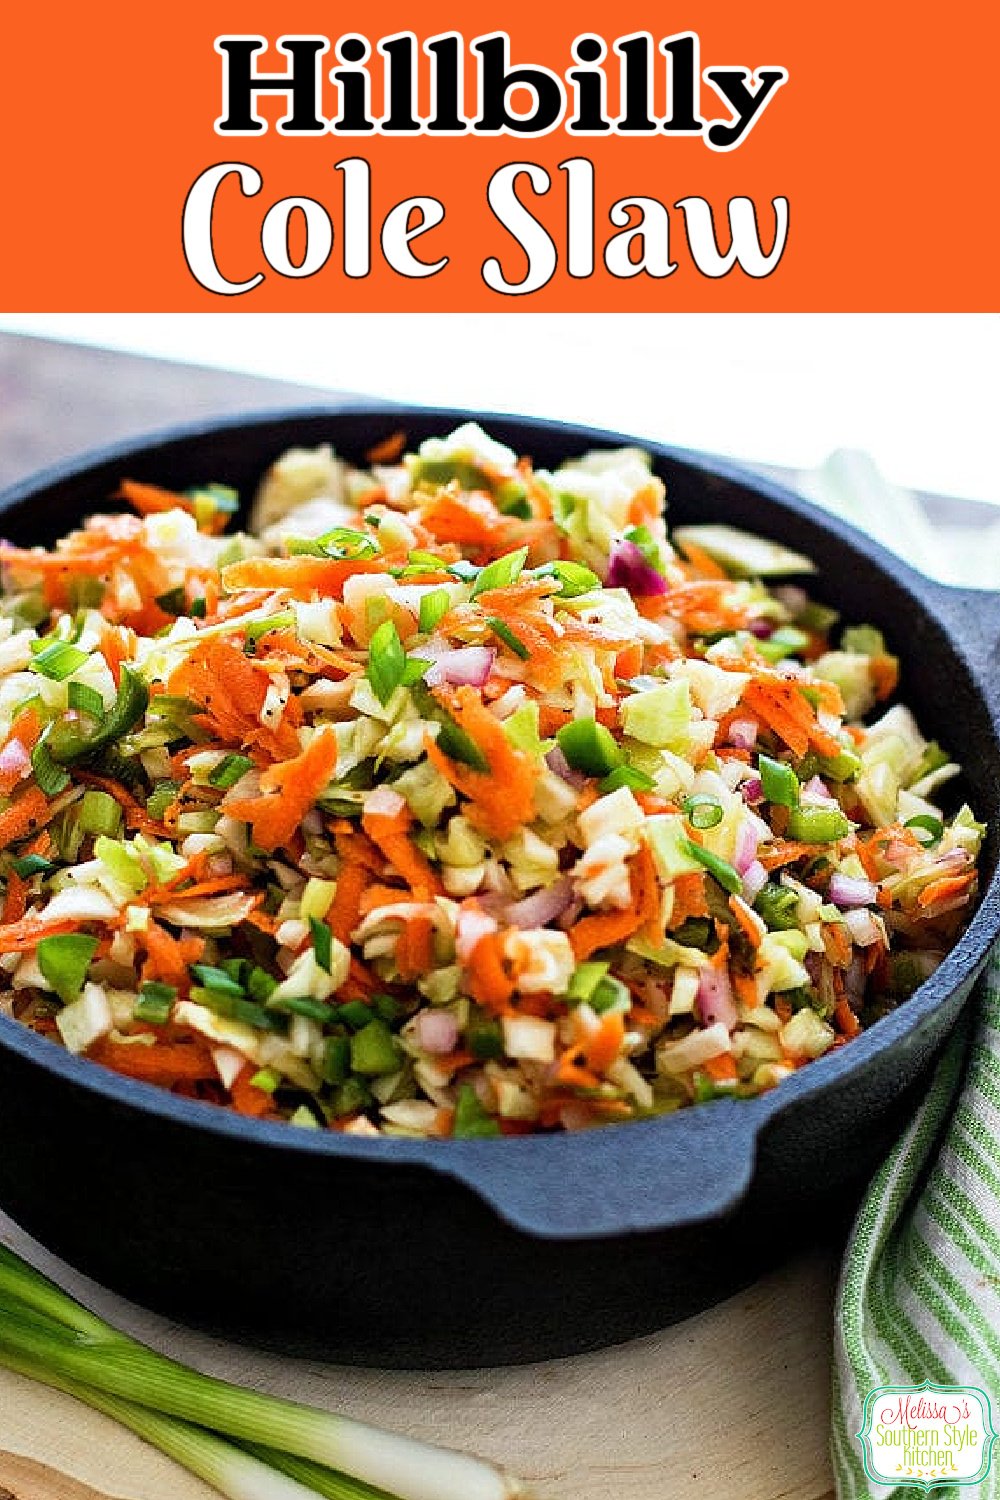 The sweet and tangy vinegar based dressing sets this cole slaw recipe apart from it's mayo-dressed counterparts. The fun name is inspired by a log cabin restaurant by the same name #coleslaw #vinegardressing #coleslawrecipes #deliciousrecipes #salads #summersides #sidedishrecipes #southernfood #southernrecipes #cabbagerecipes via @melissasssk